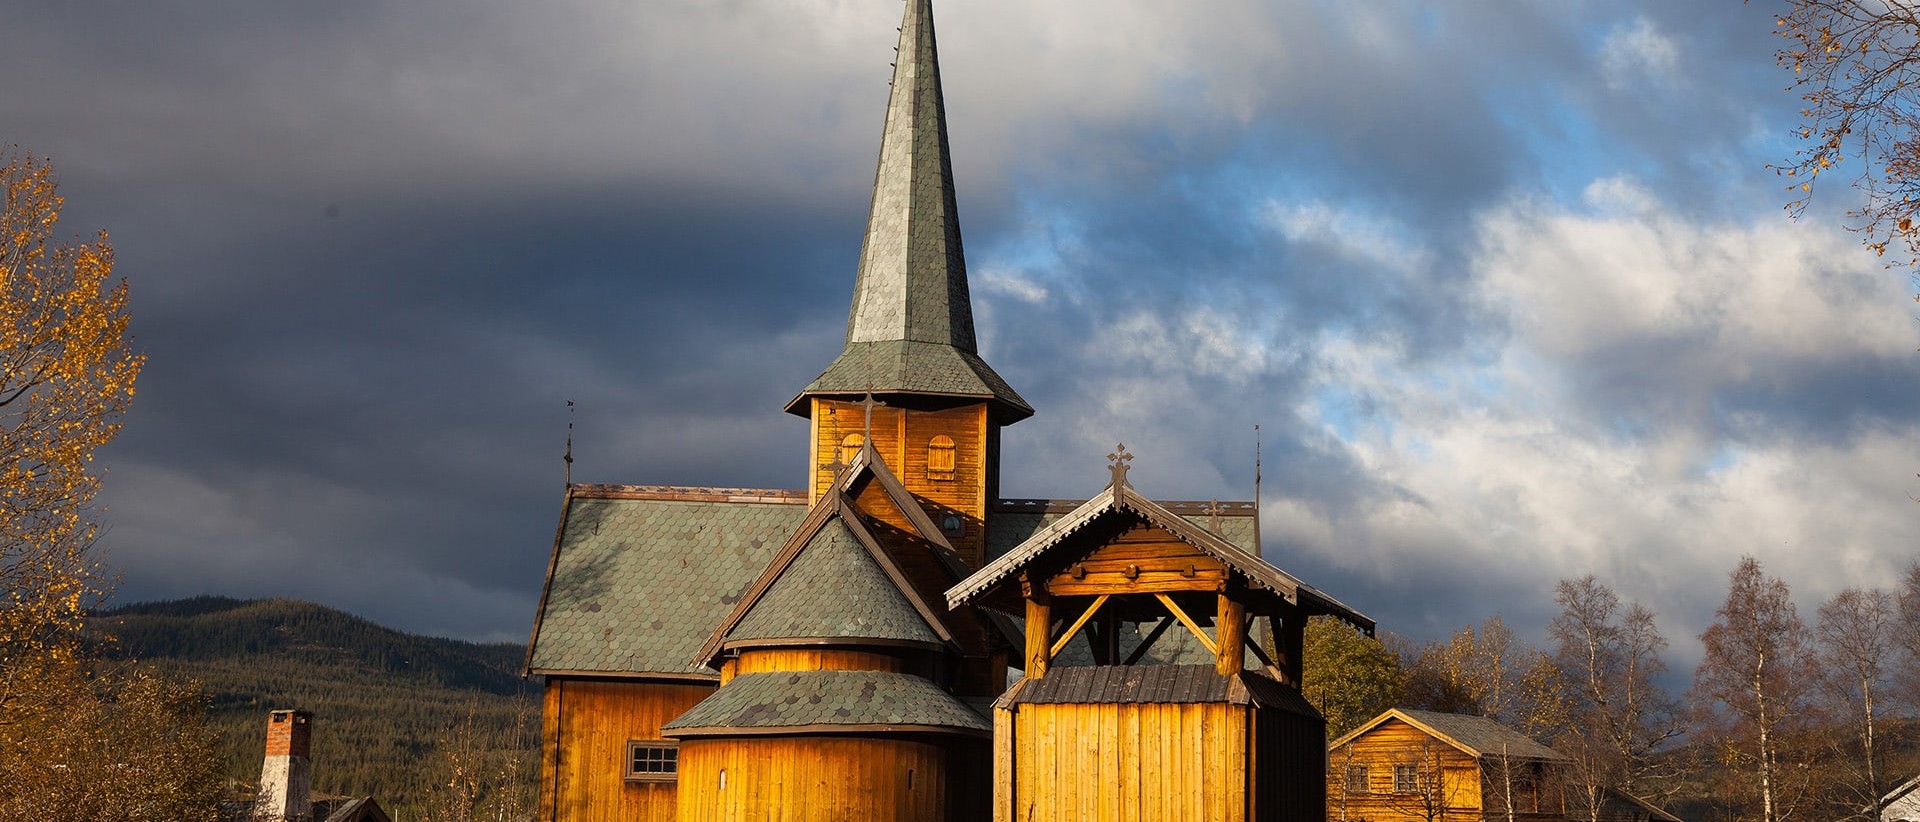 The stave church of Hedalen on a cloudy day.